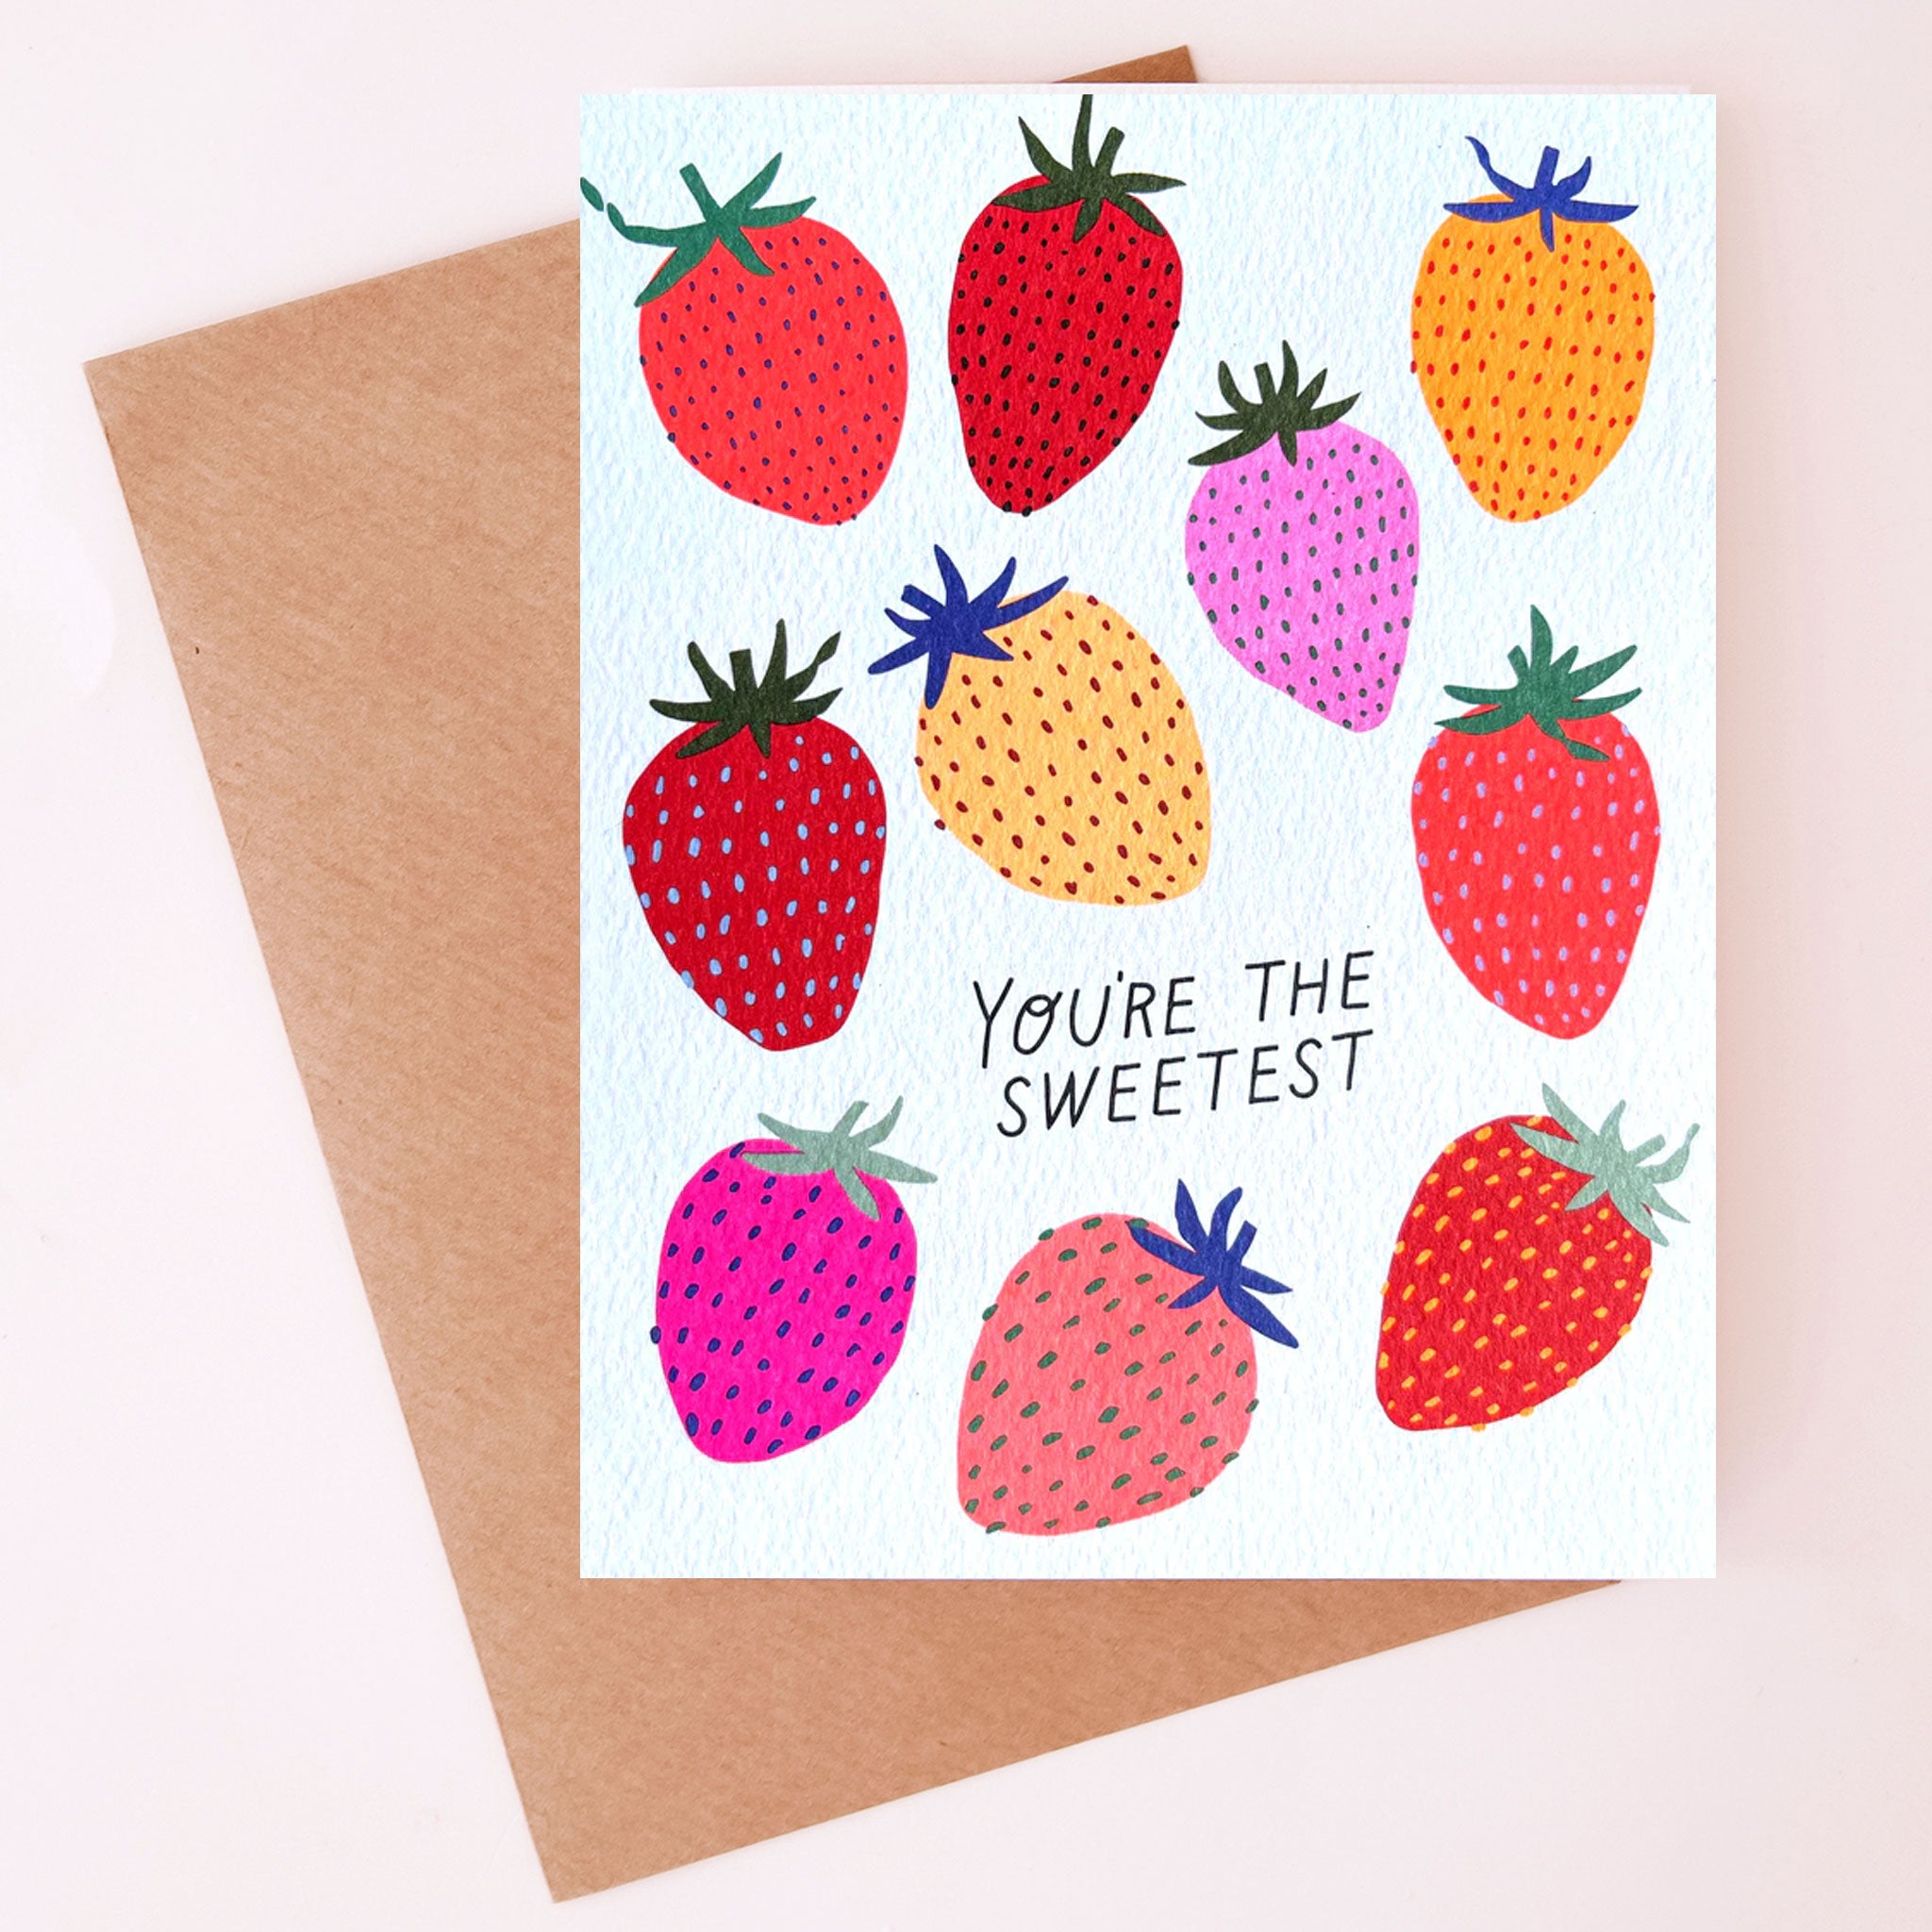 On a neutral background is a white greeting card with various strawberry prints on the front in shades of red, pink and yellow along with text in the center that reads, "You're The Sweetest". 